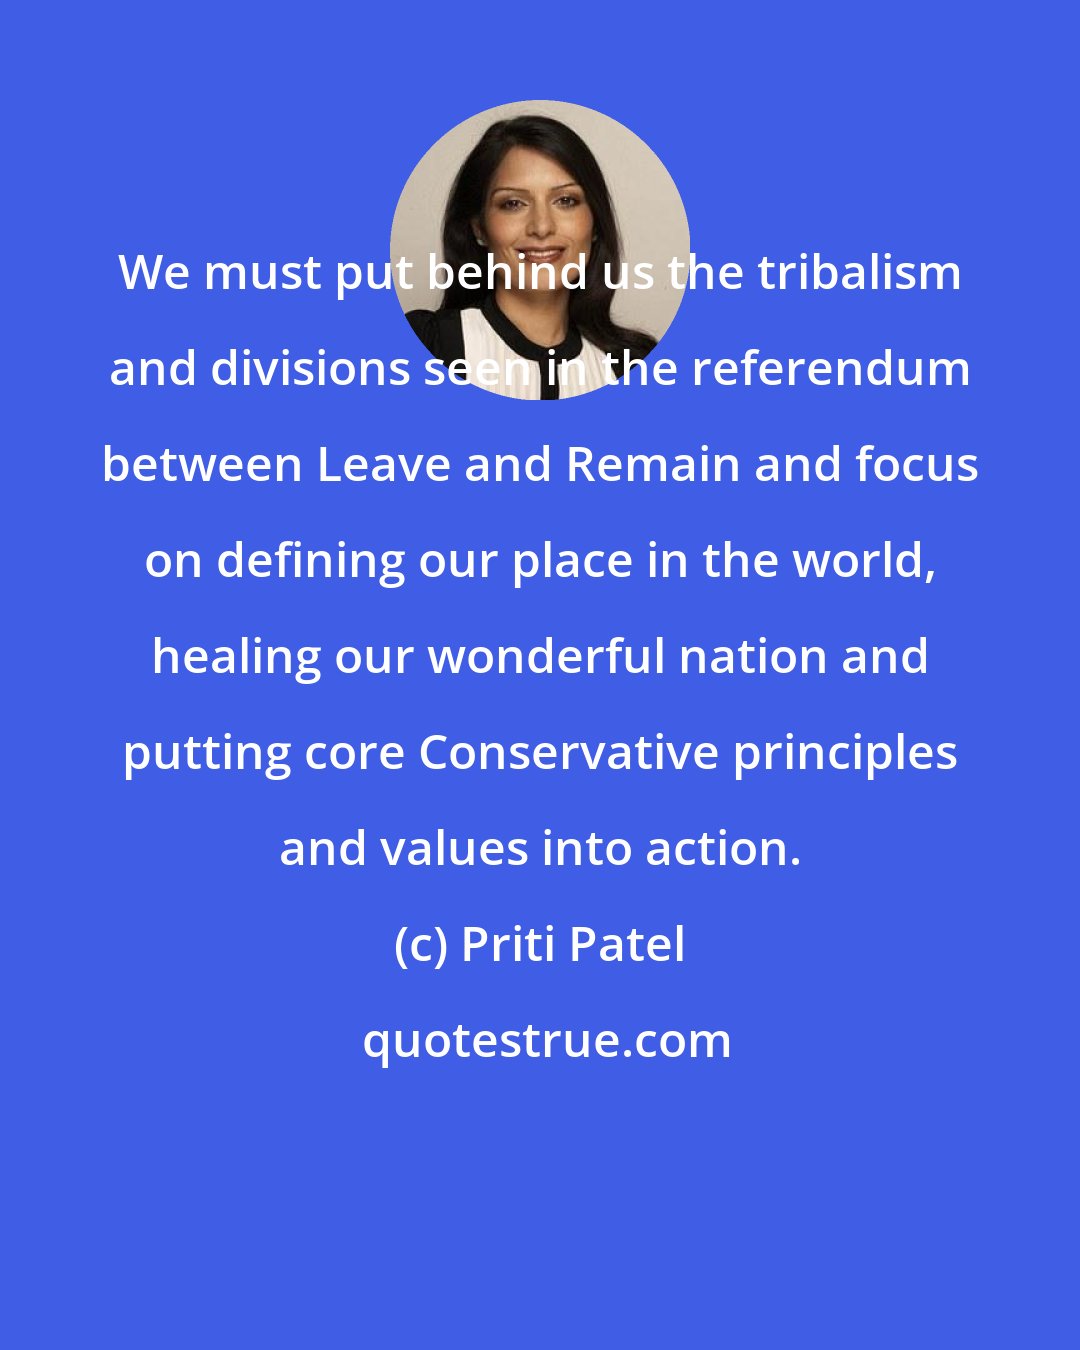 Priti Patel: We must put behind us the tribalism and divisions seen in the referendum between Leave and Remain and focus on defining our place in the world, healing our wonderful nation and putting core Conservative principles and values into action.